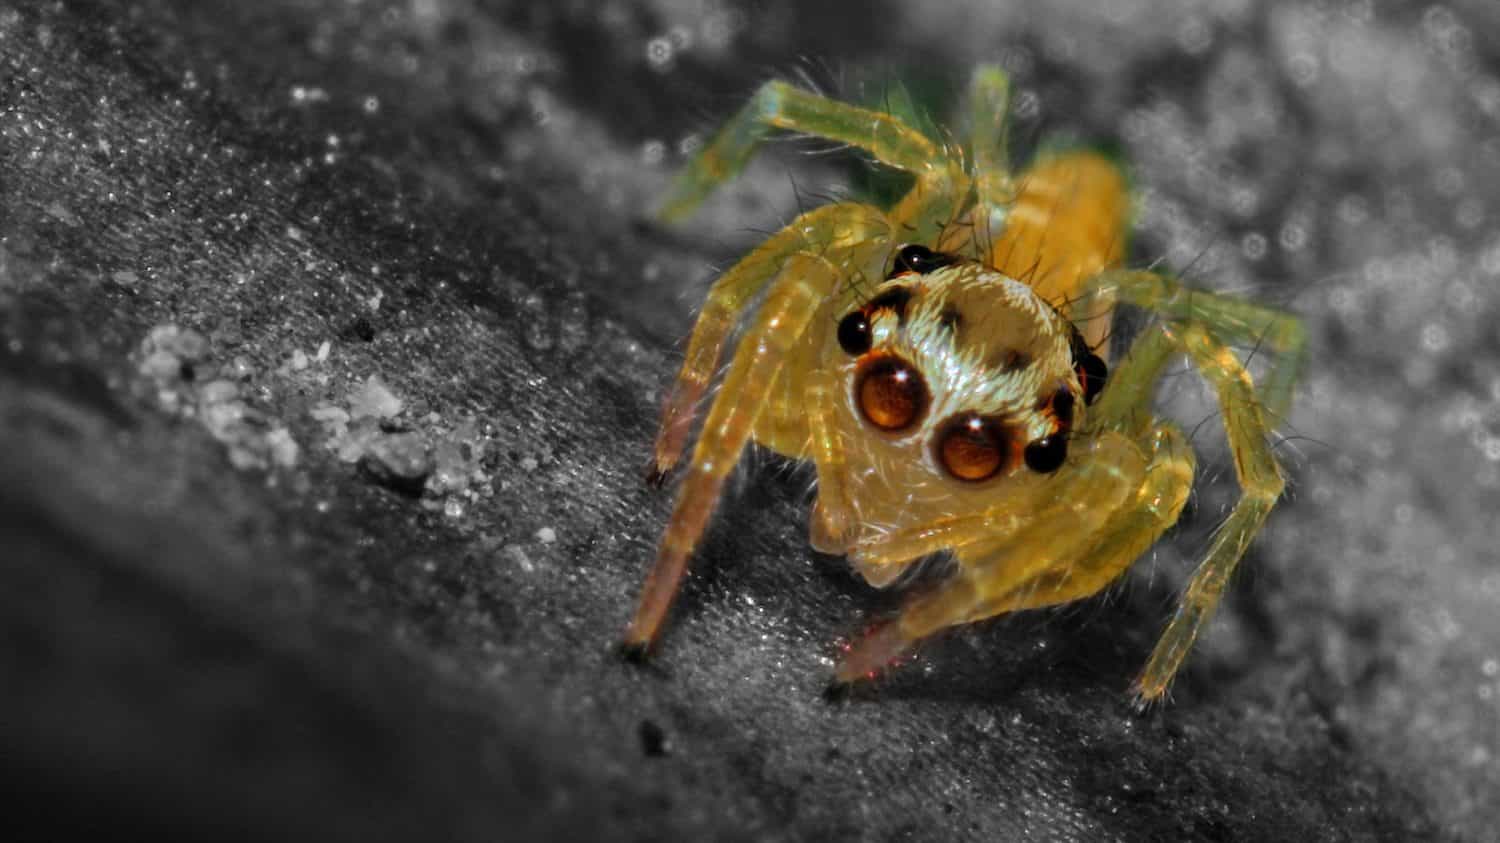 The baby jumping spider on a leaf